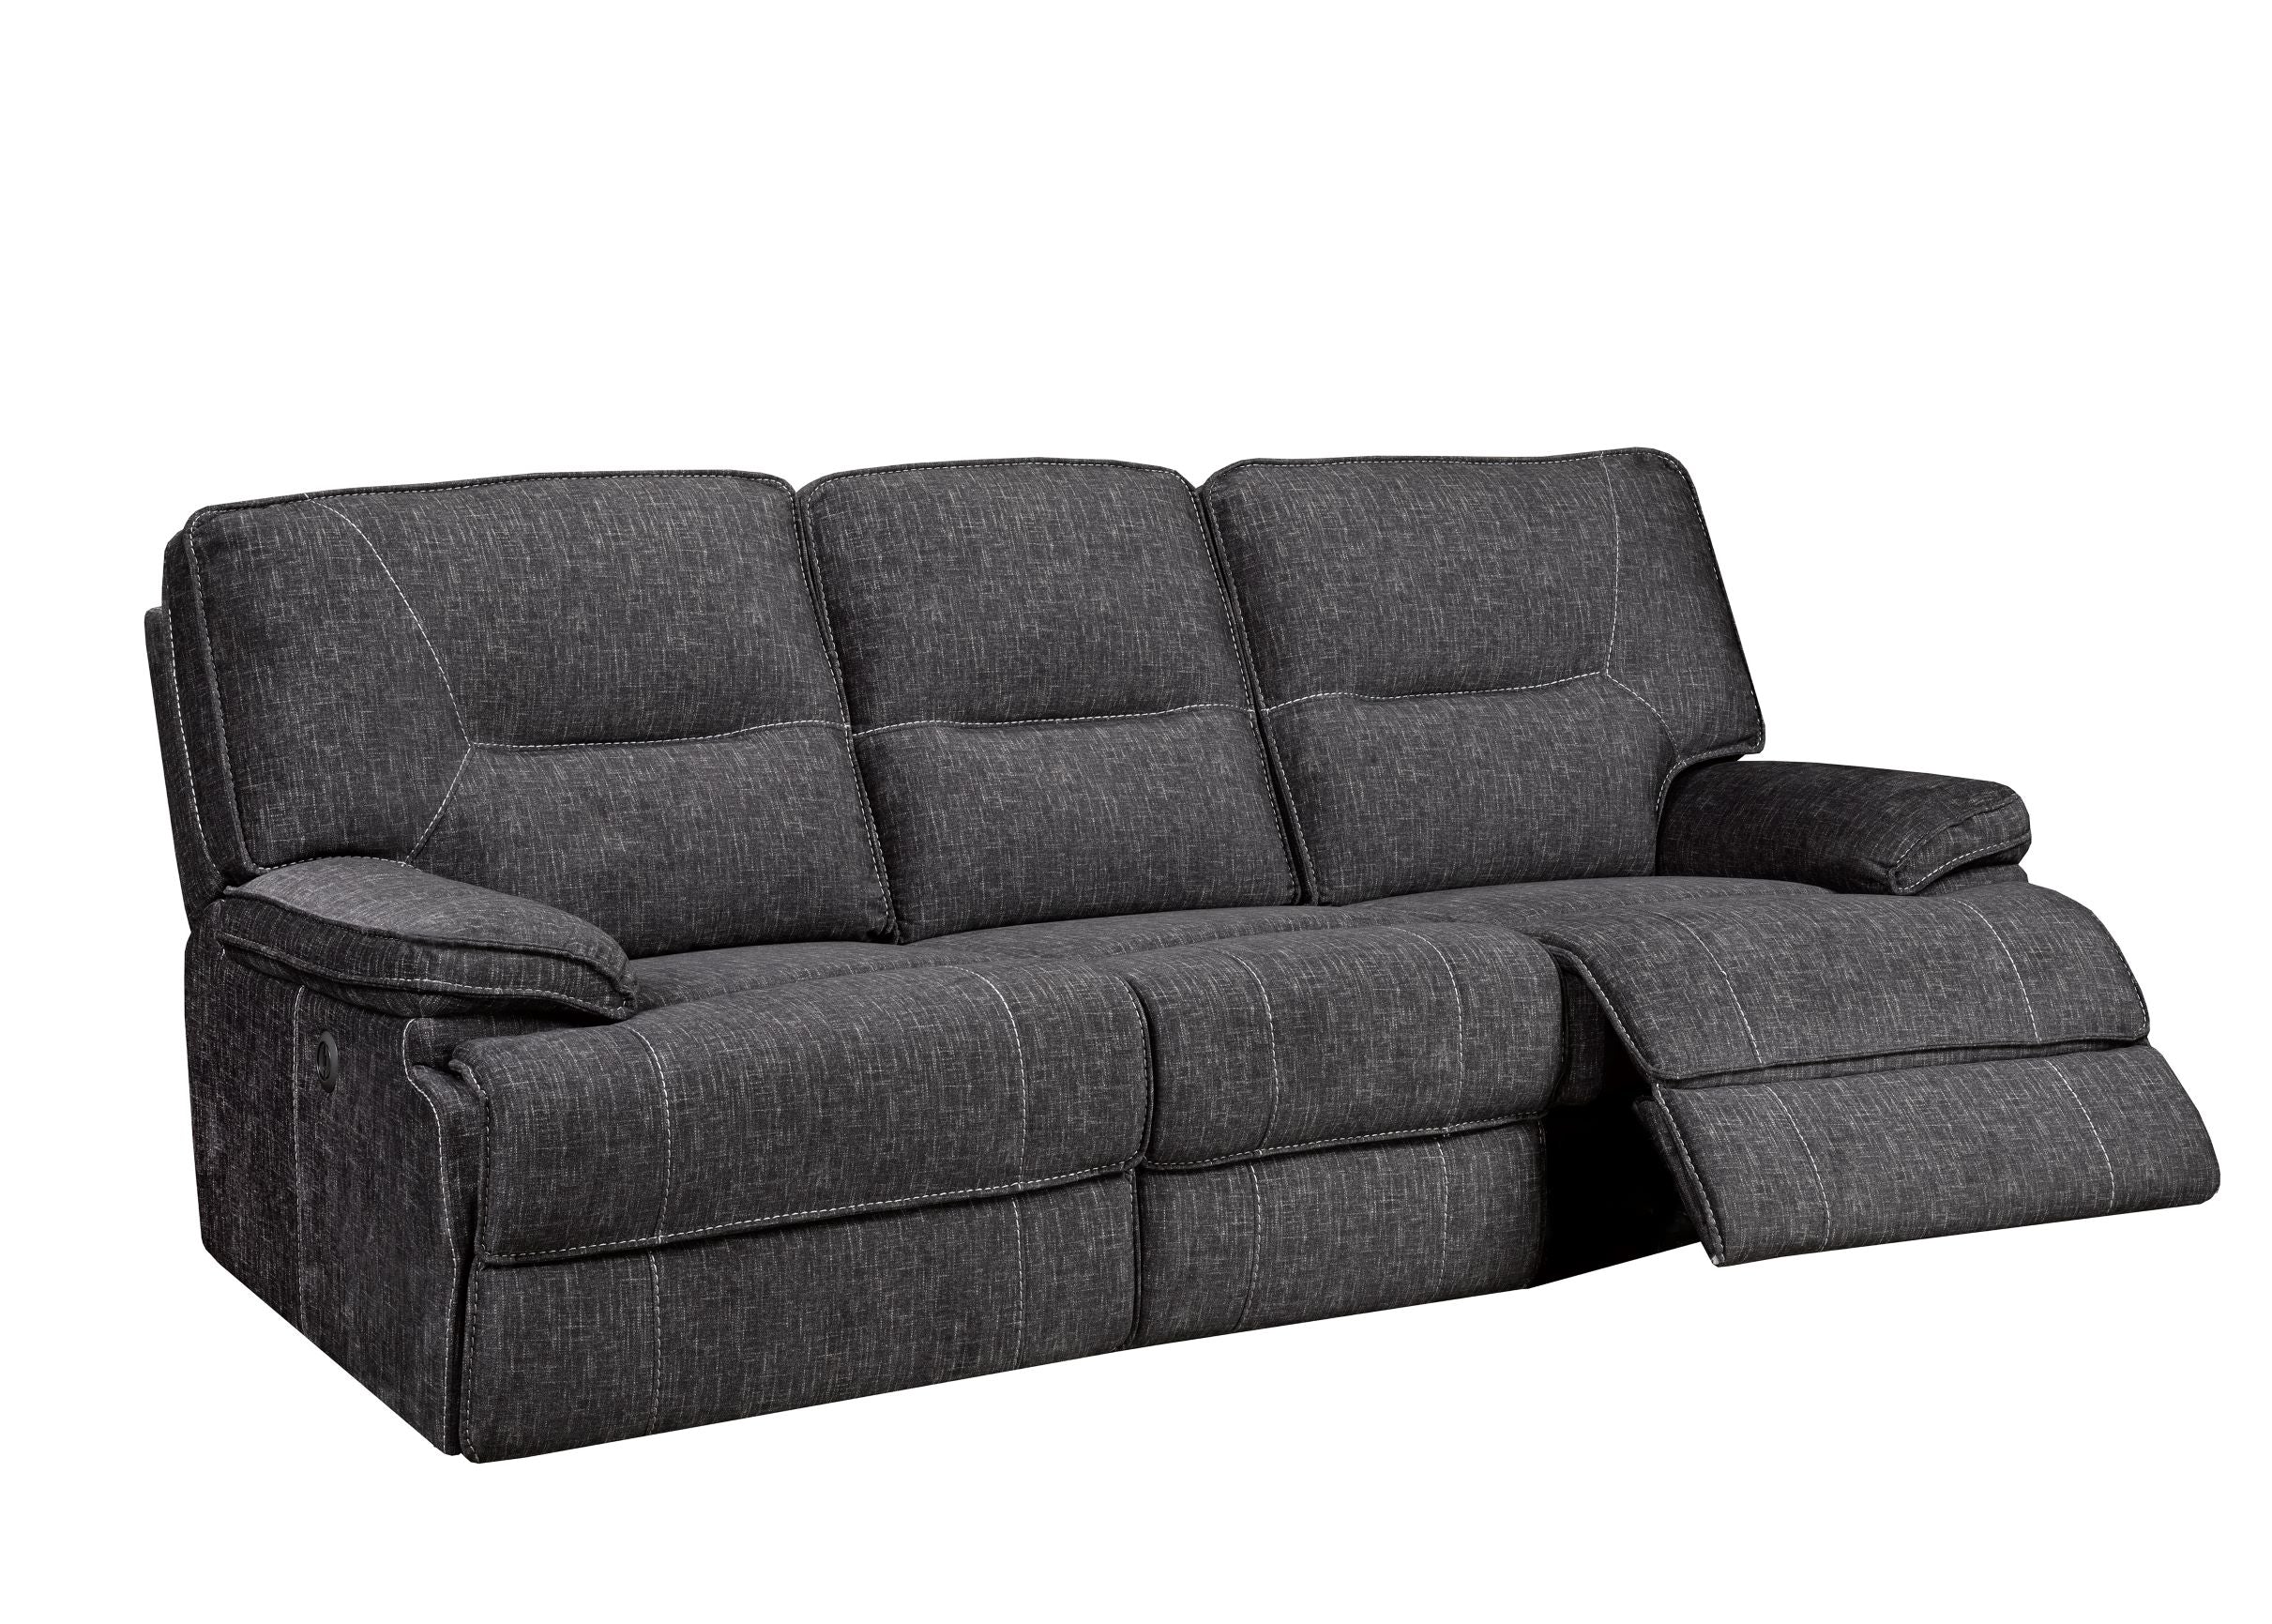 Maryland Power Recliner Sofa Collection - 6500